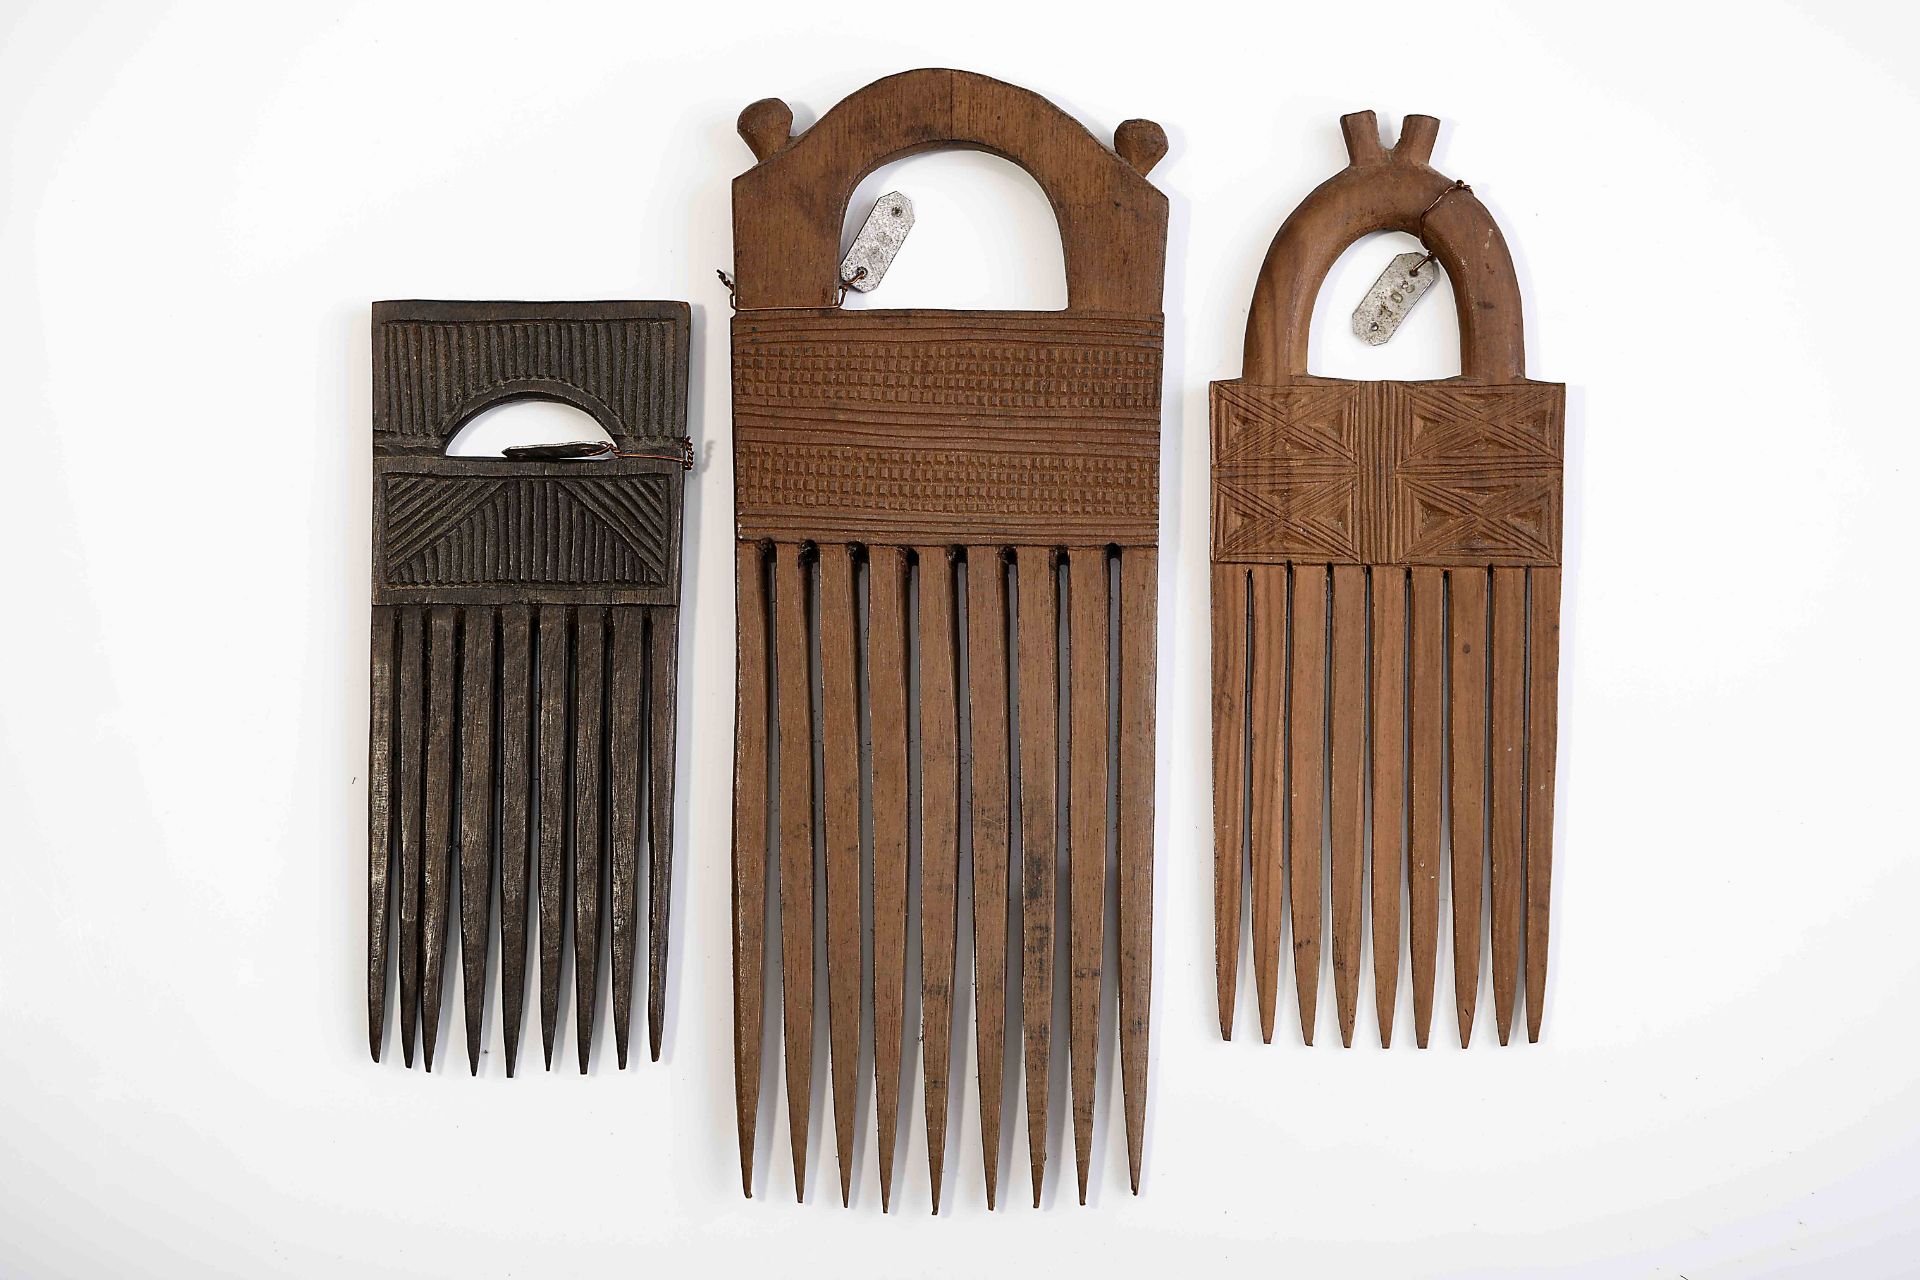 Three different combs